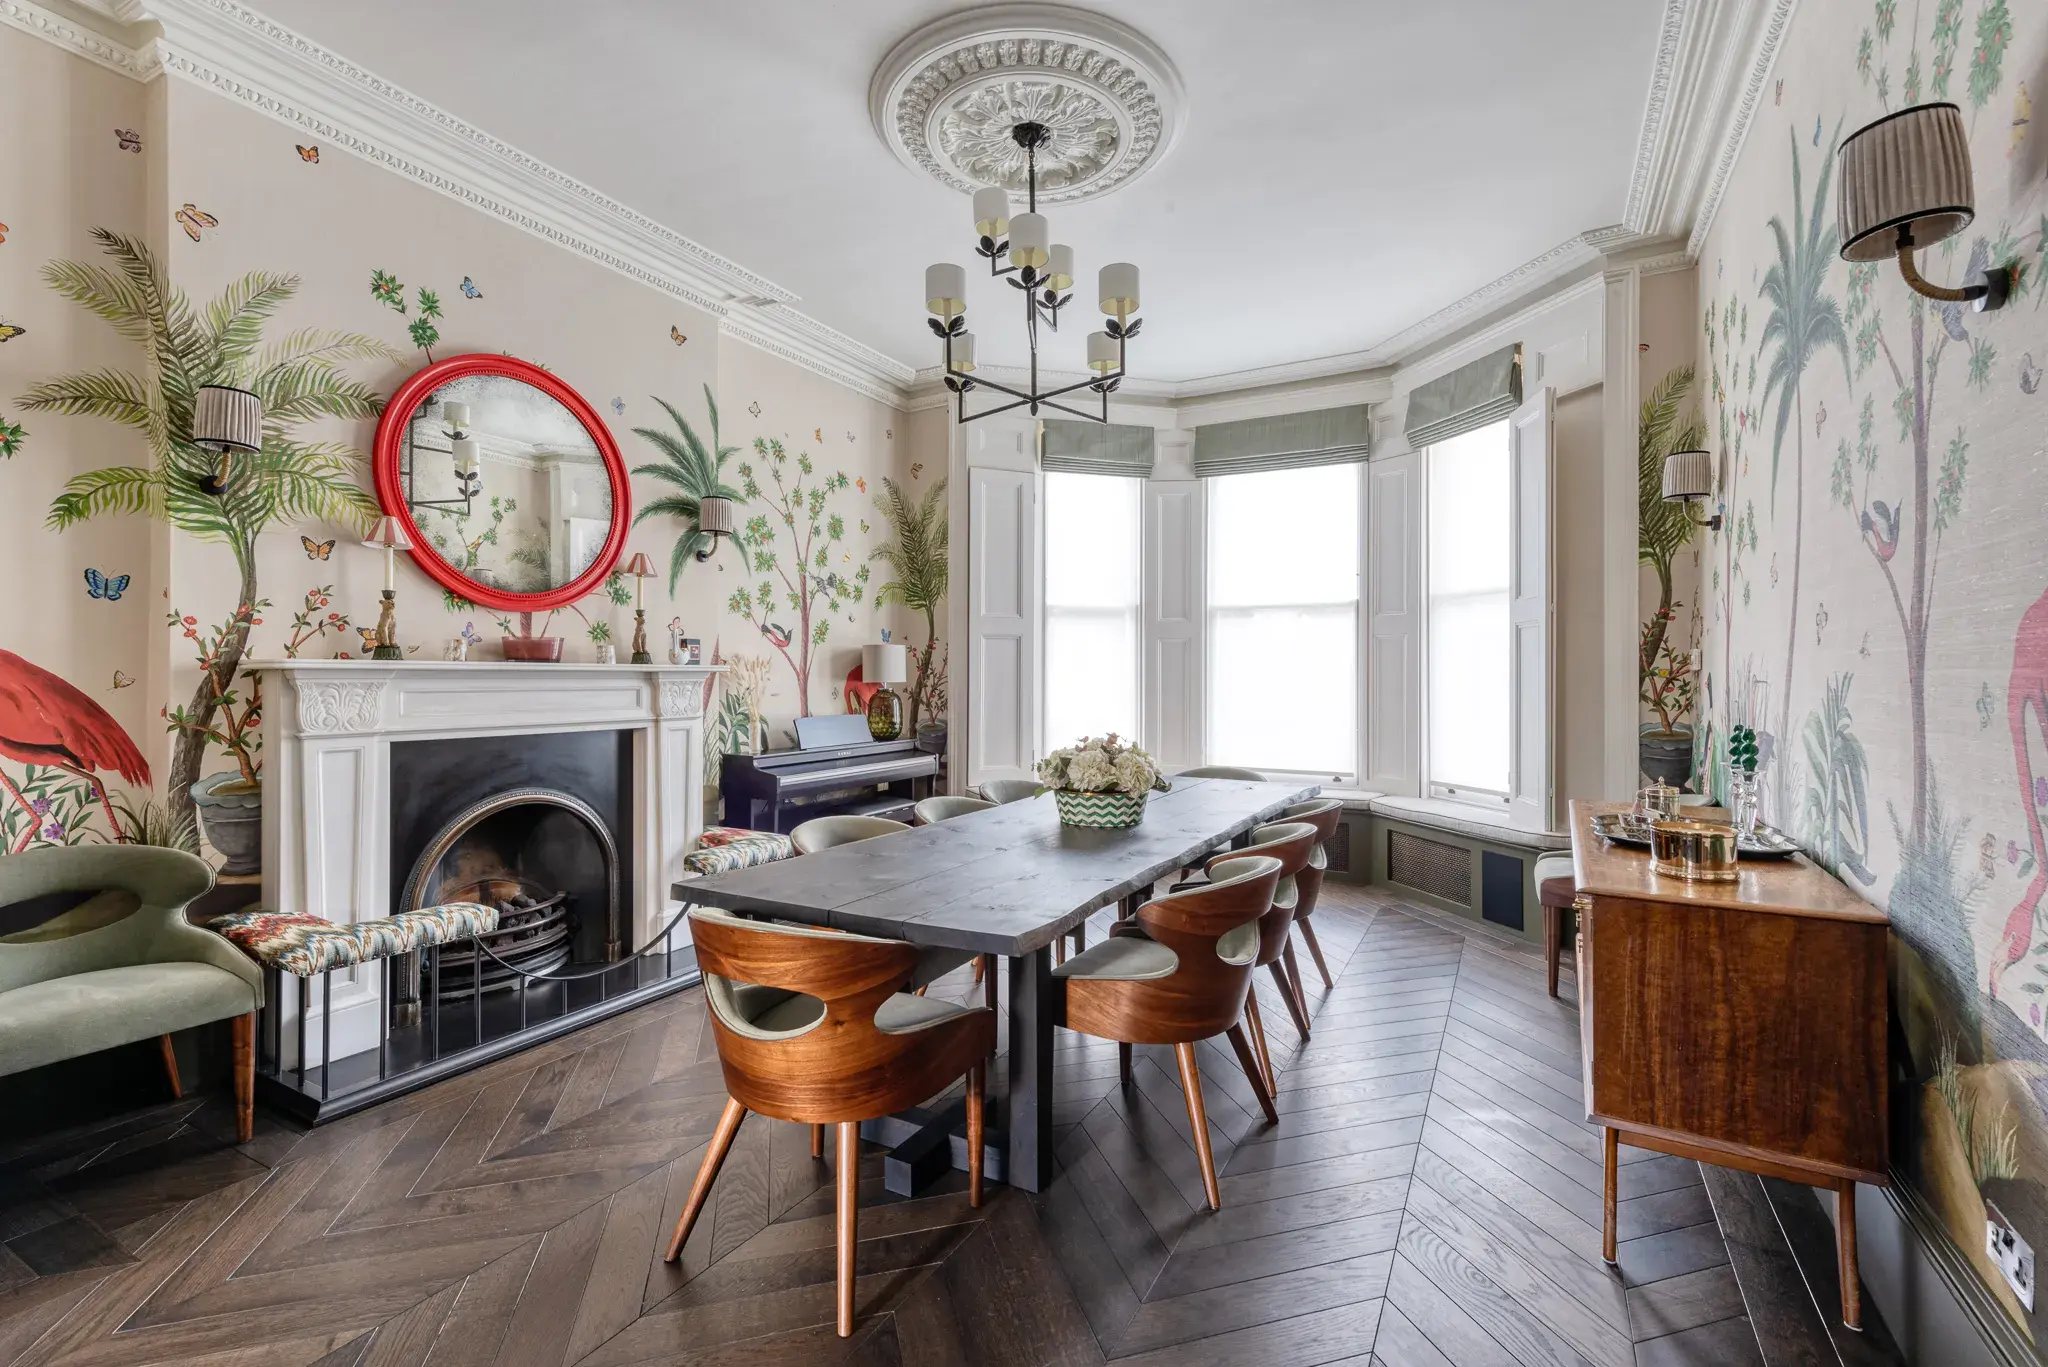 Argyll Road, holiday home in Kensington, London